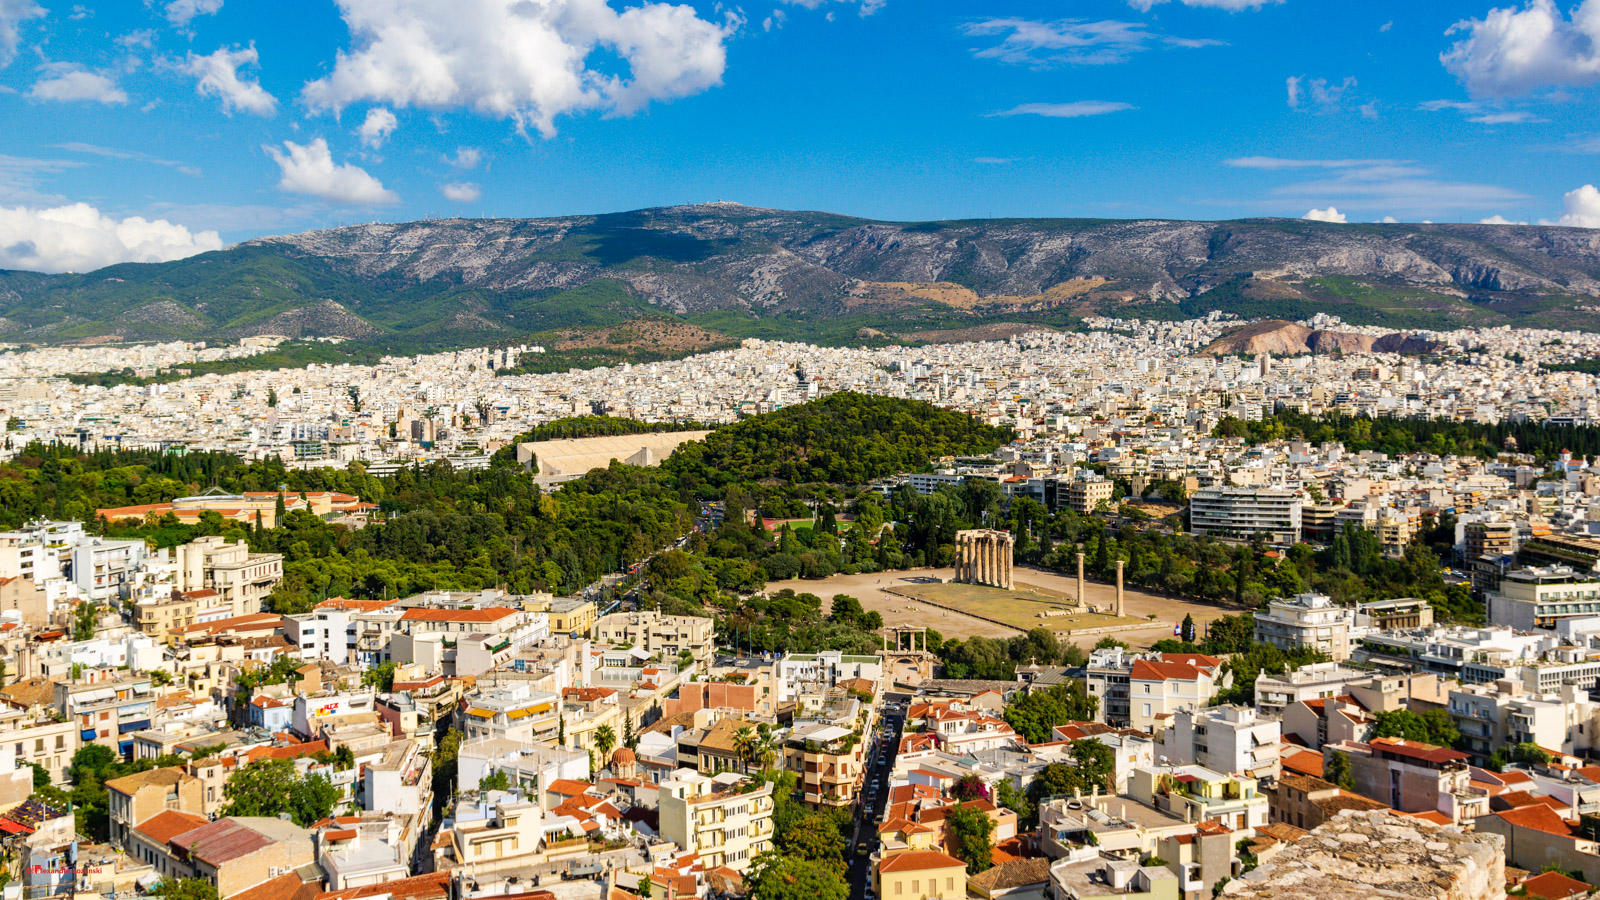 View of Temple of Olympian Zeus from the Acropolis